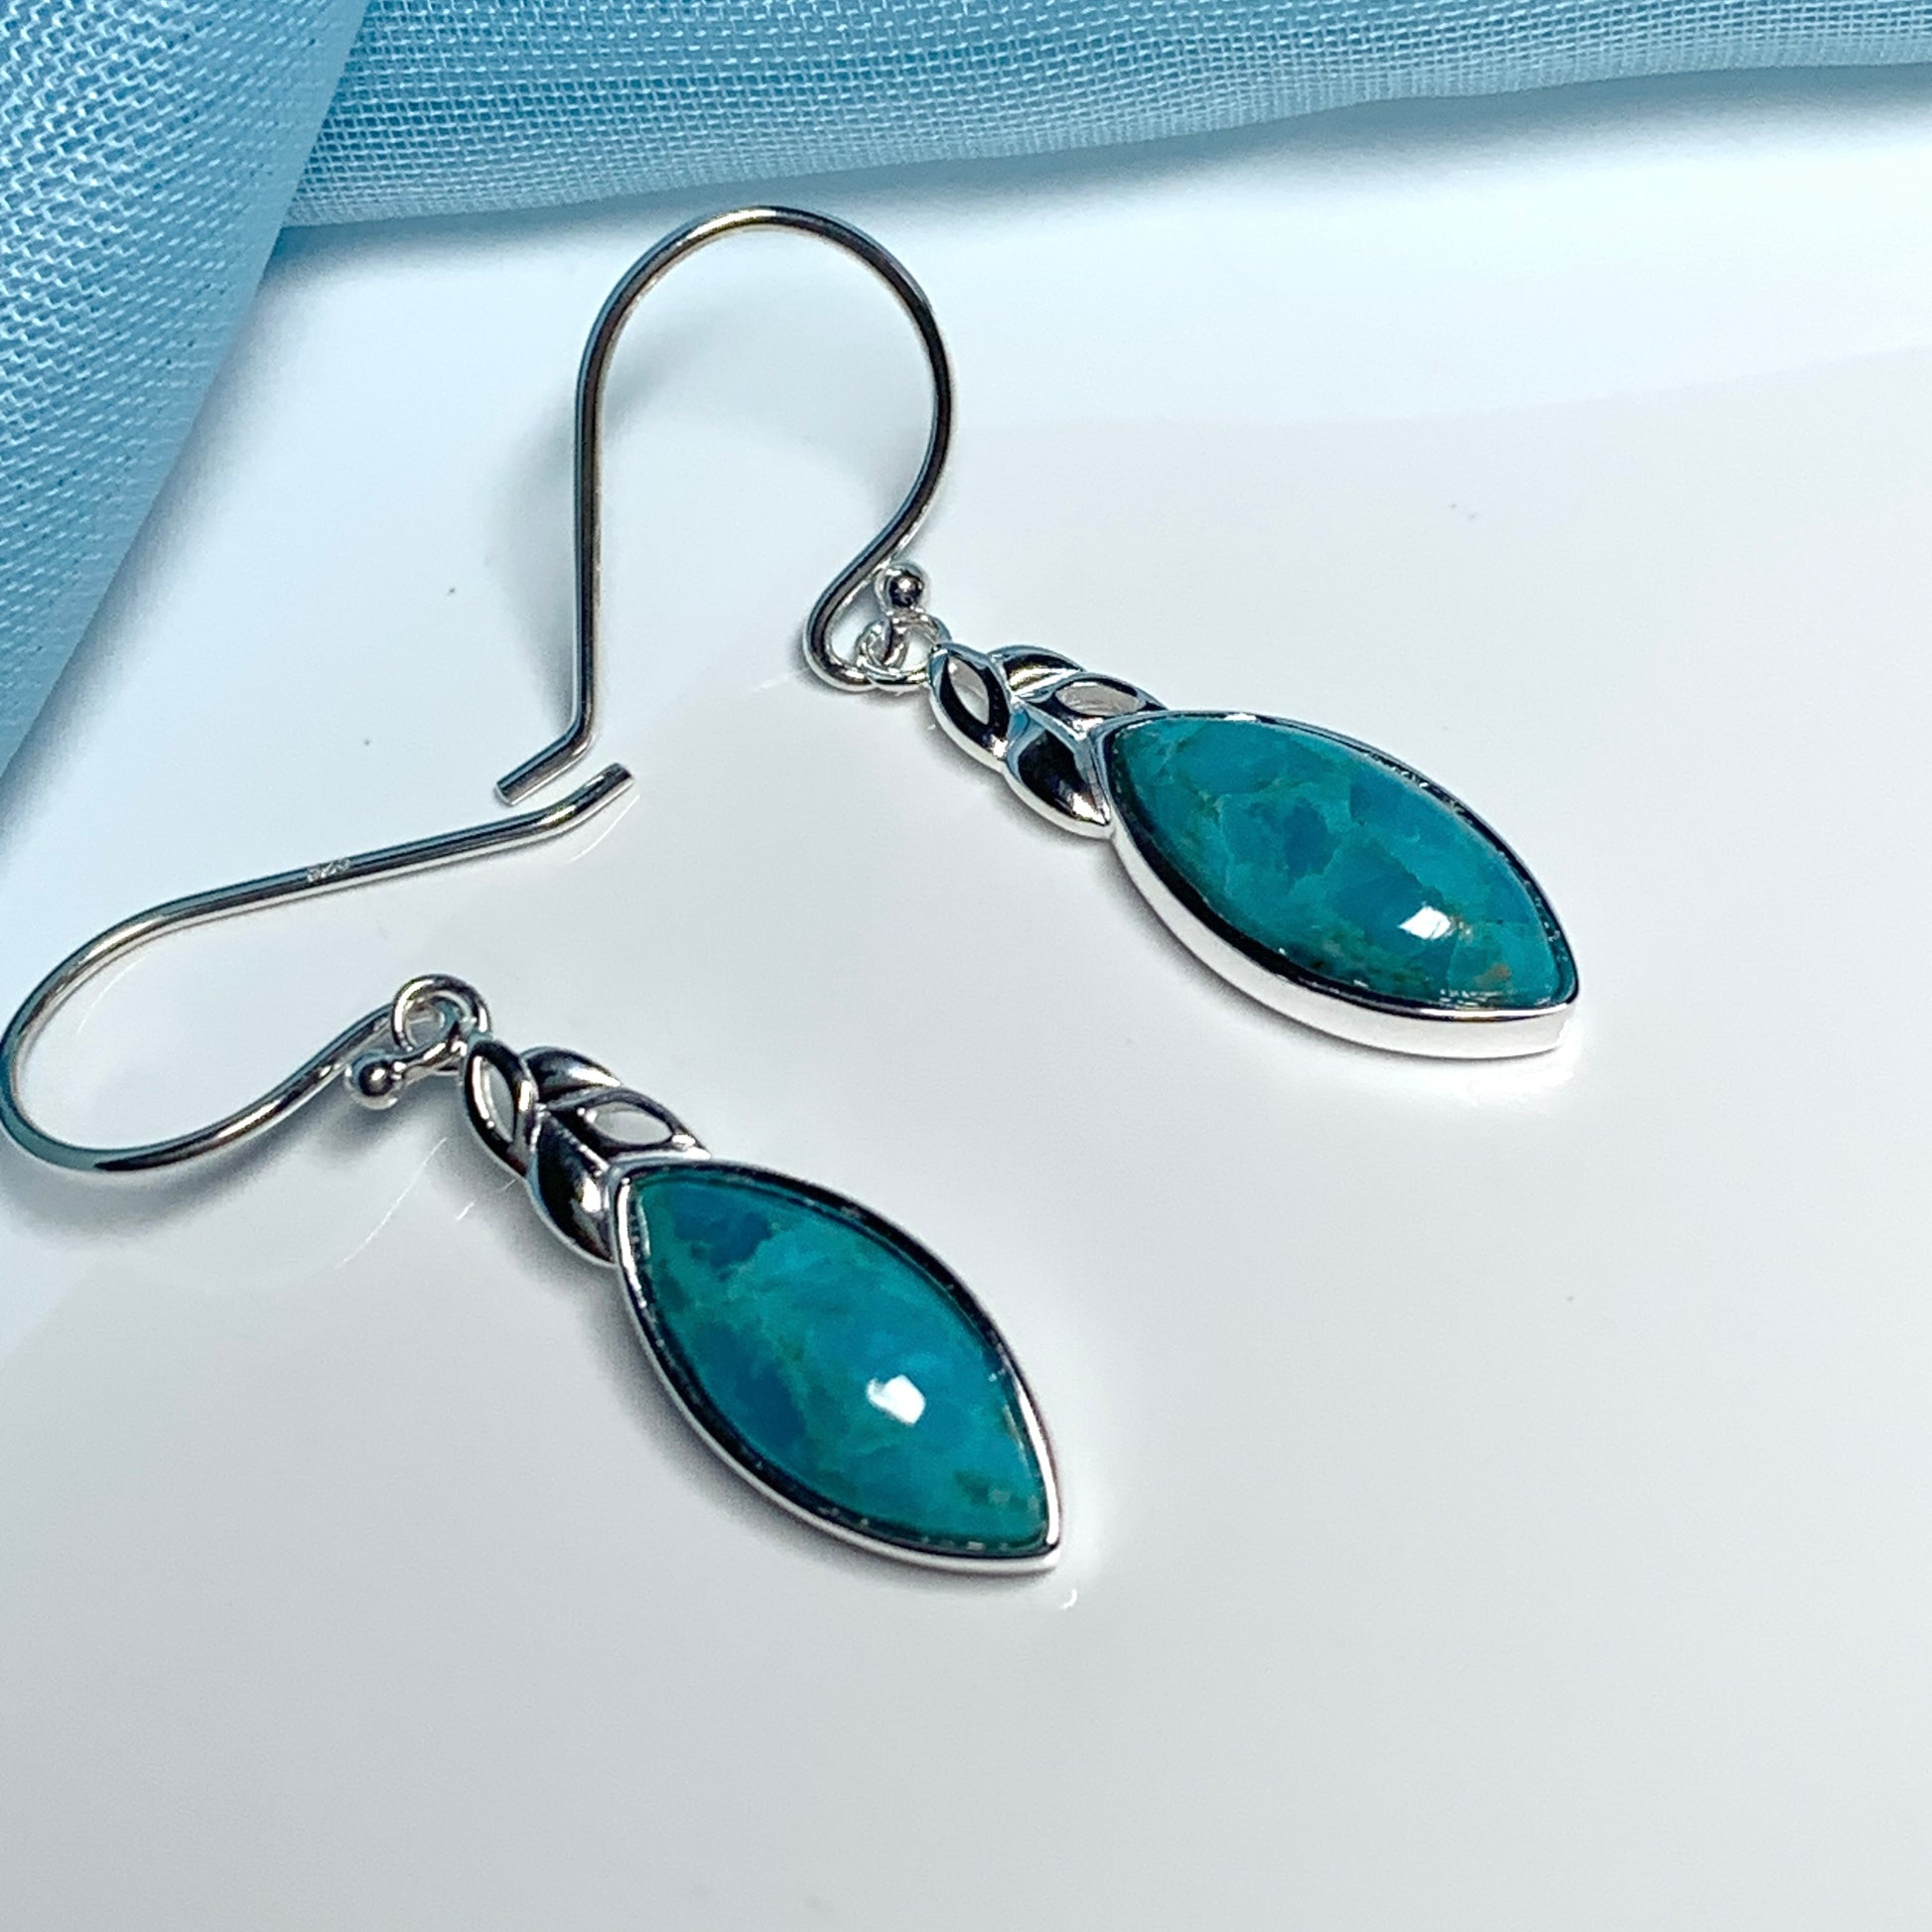 Turquoise earrings drop sterling silver marquise cut